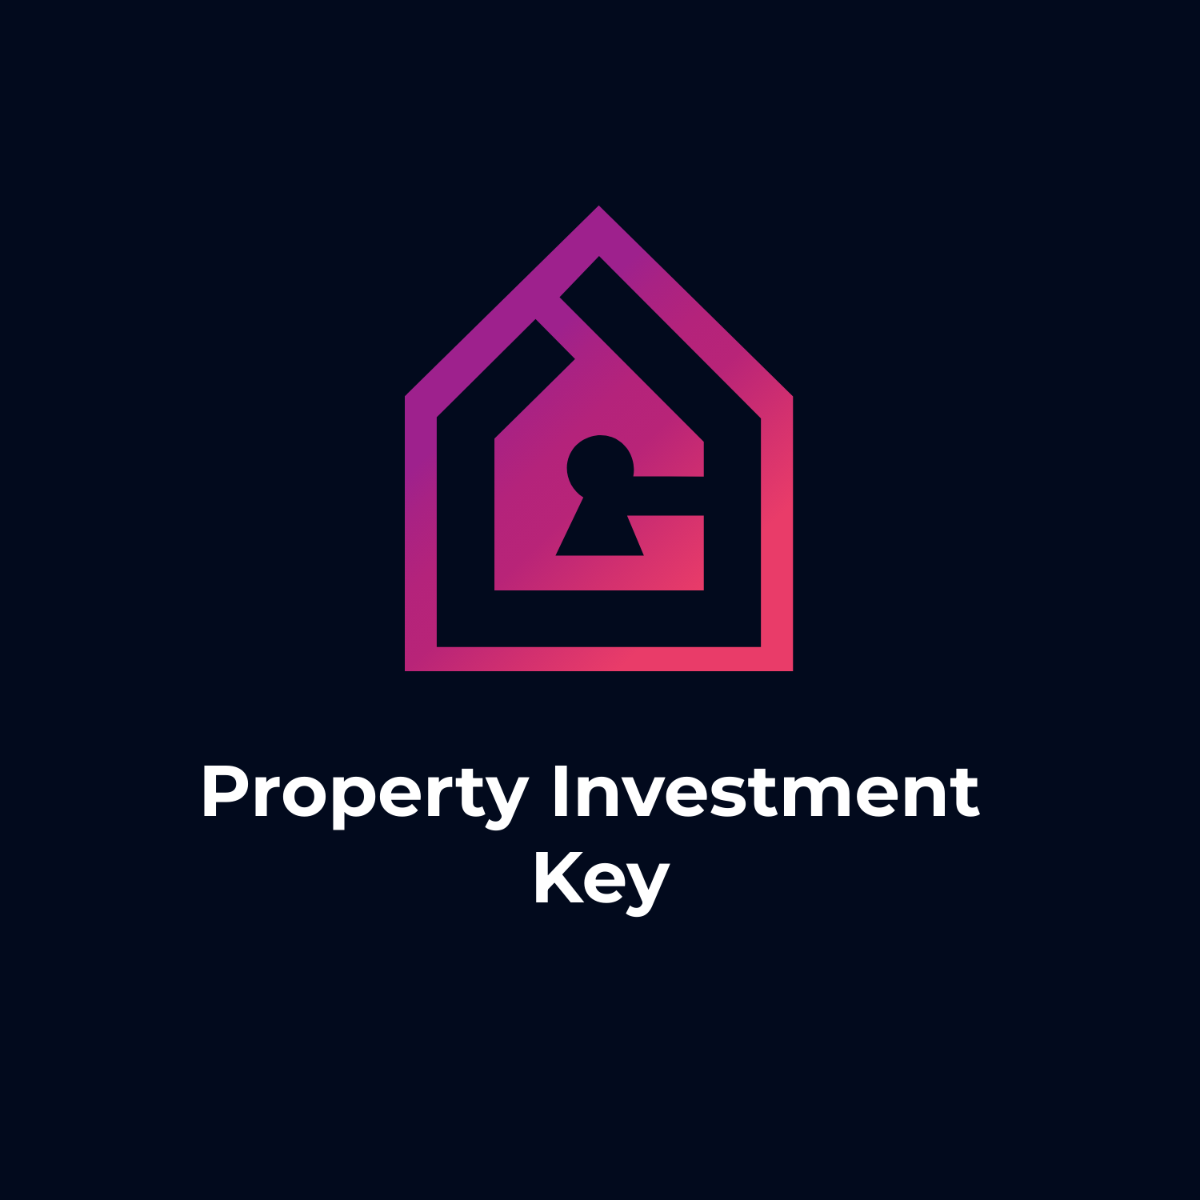 Property Investment Key Logo Template